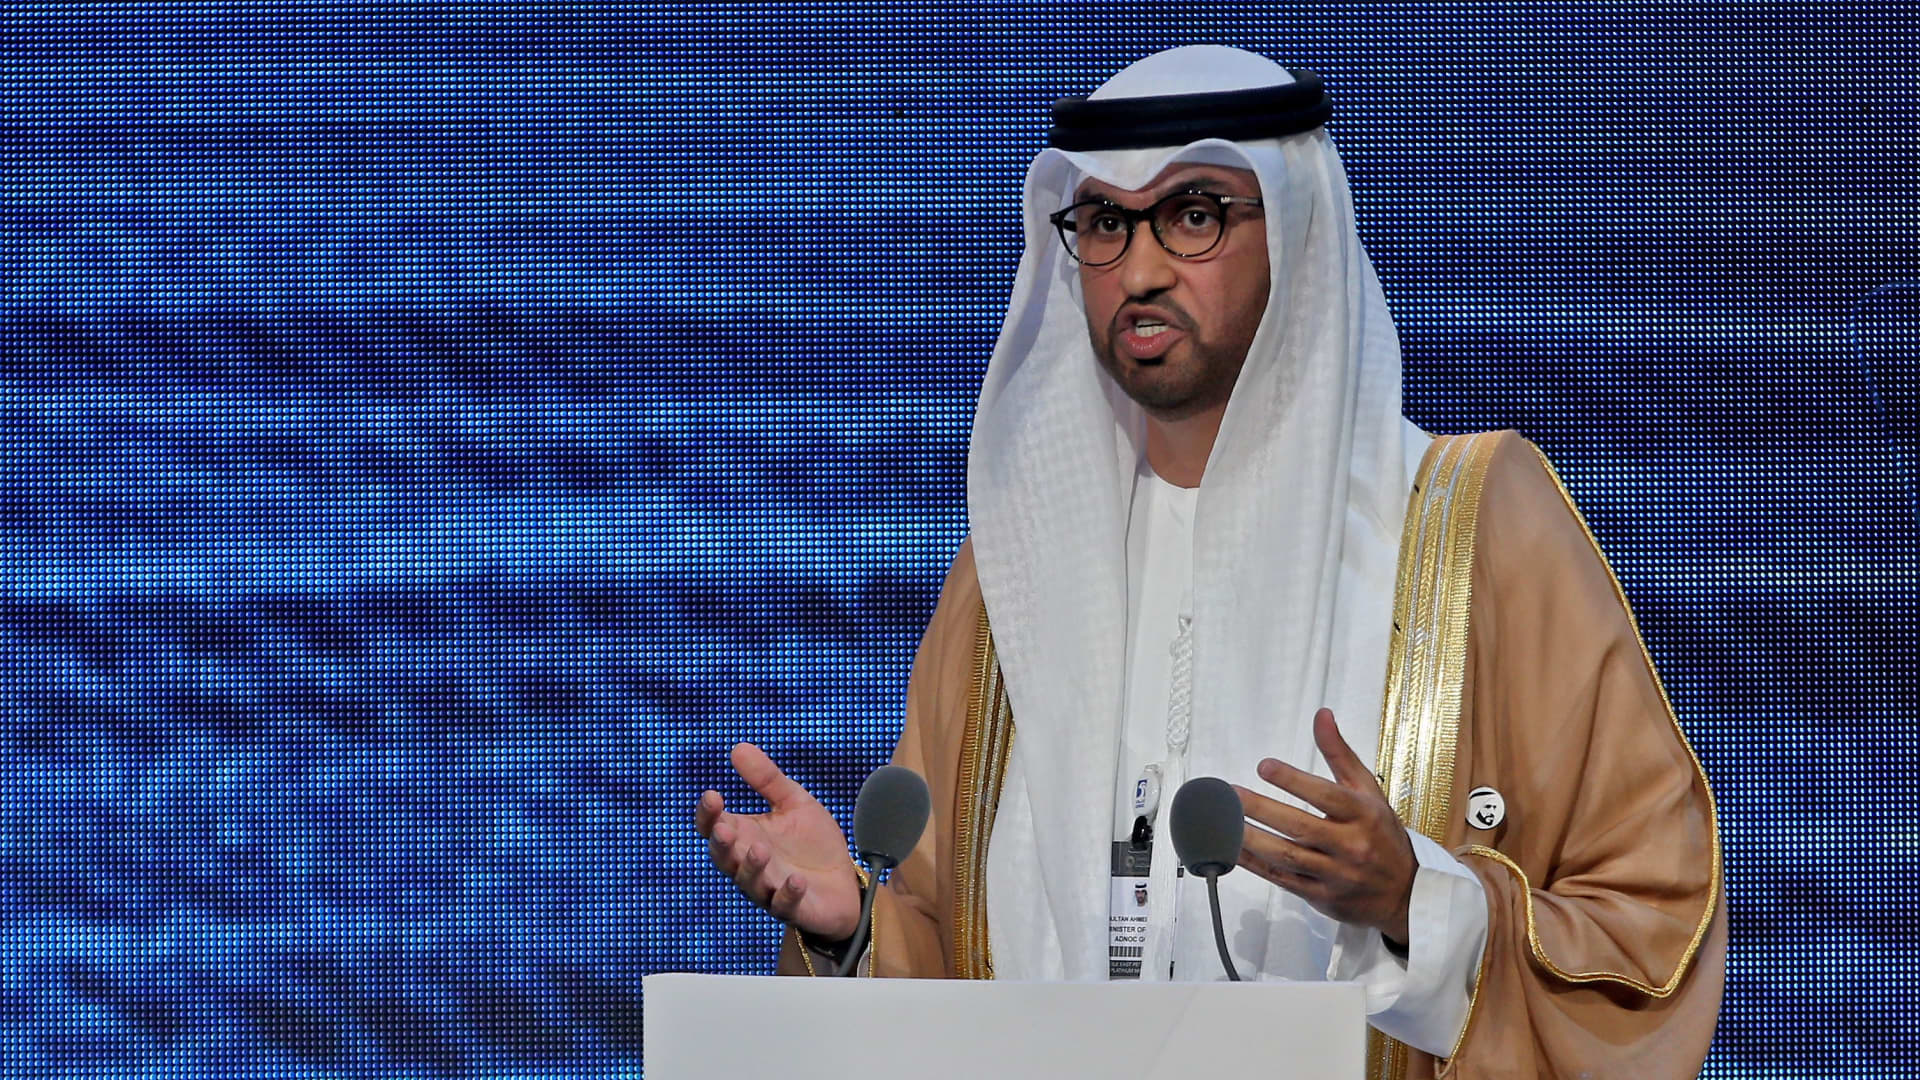 UAE's Minister of State and CEO of the Abu Dhabi National Oil Company Sultan al-Jaber speaks during the opening ceremony of the Abu Dhabi International Petroleum Exhibition and Conference in Abu Dhabi on November 11, 2019.